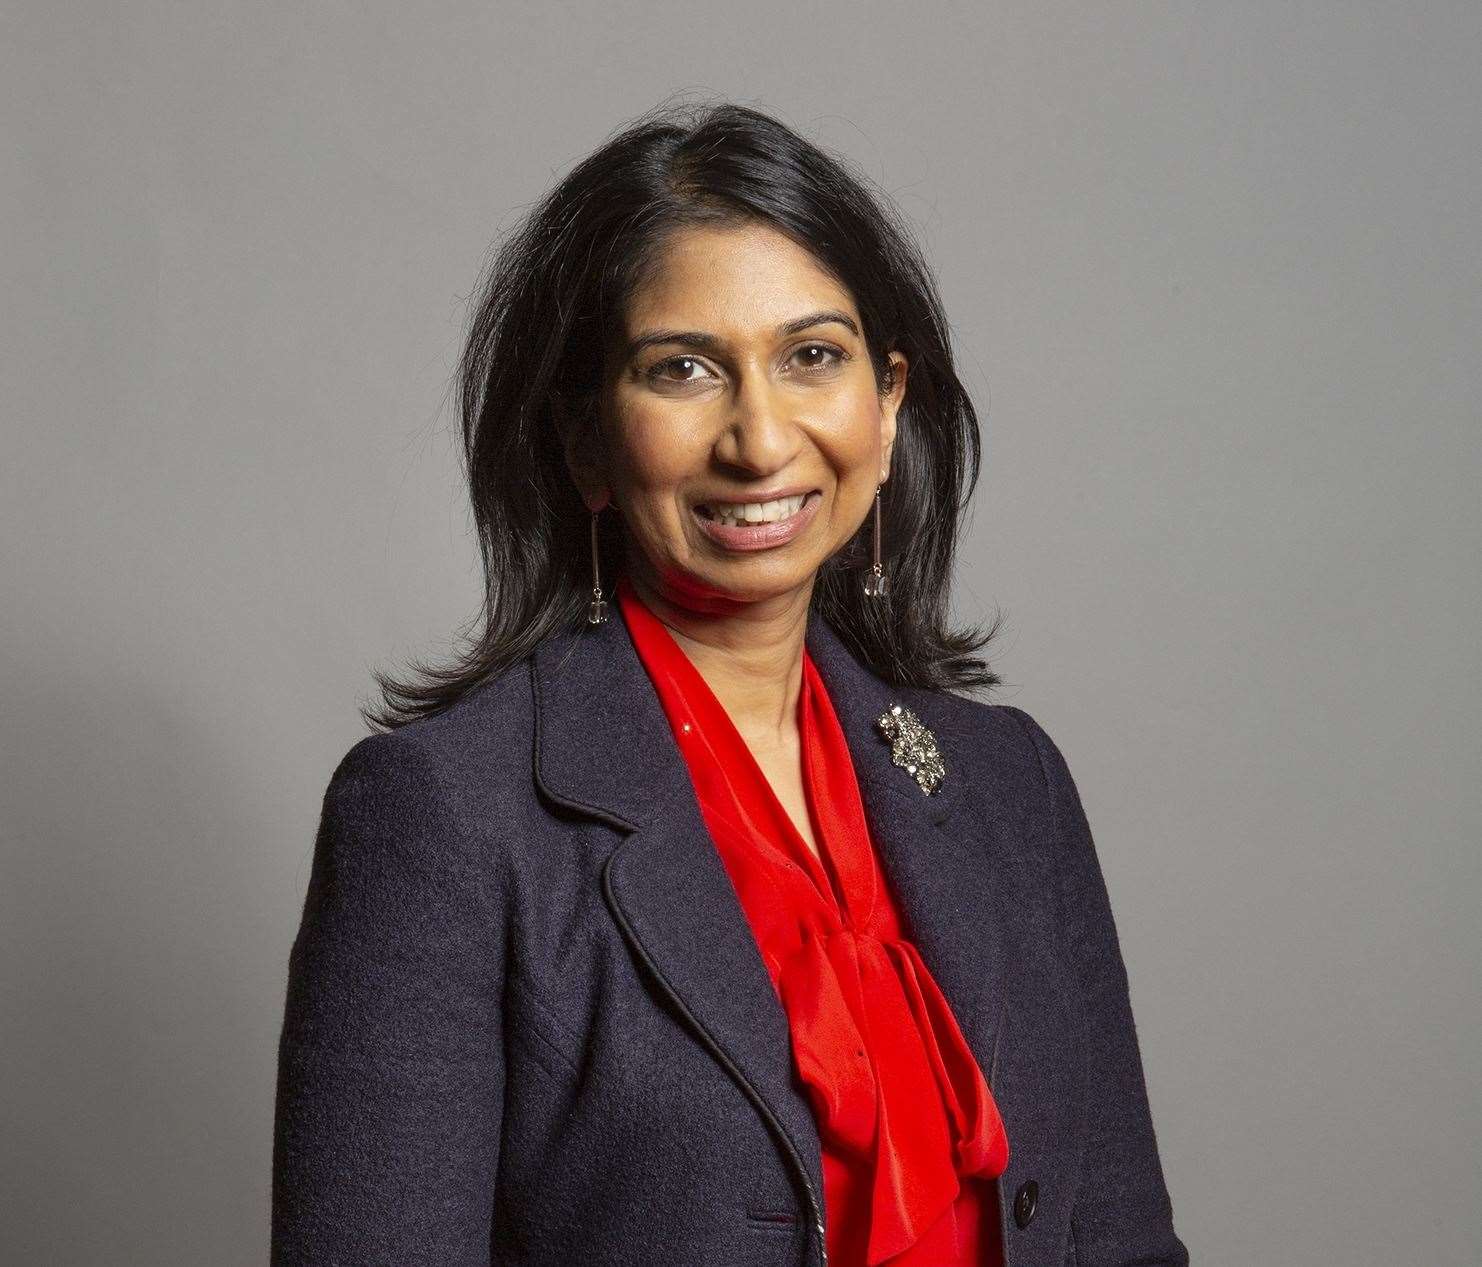 Government sources have said Suella Braverman's decision as Home Secretary led to overcrowding an an outbreak of scabies at Manston airport asylum centre